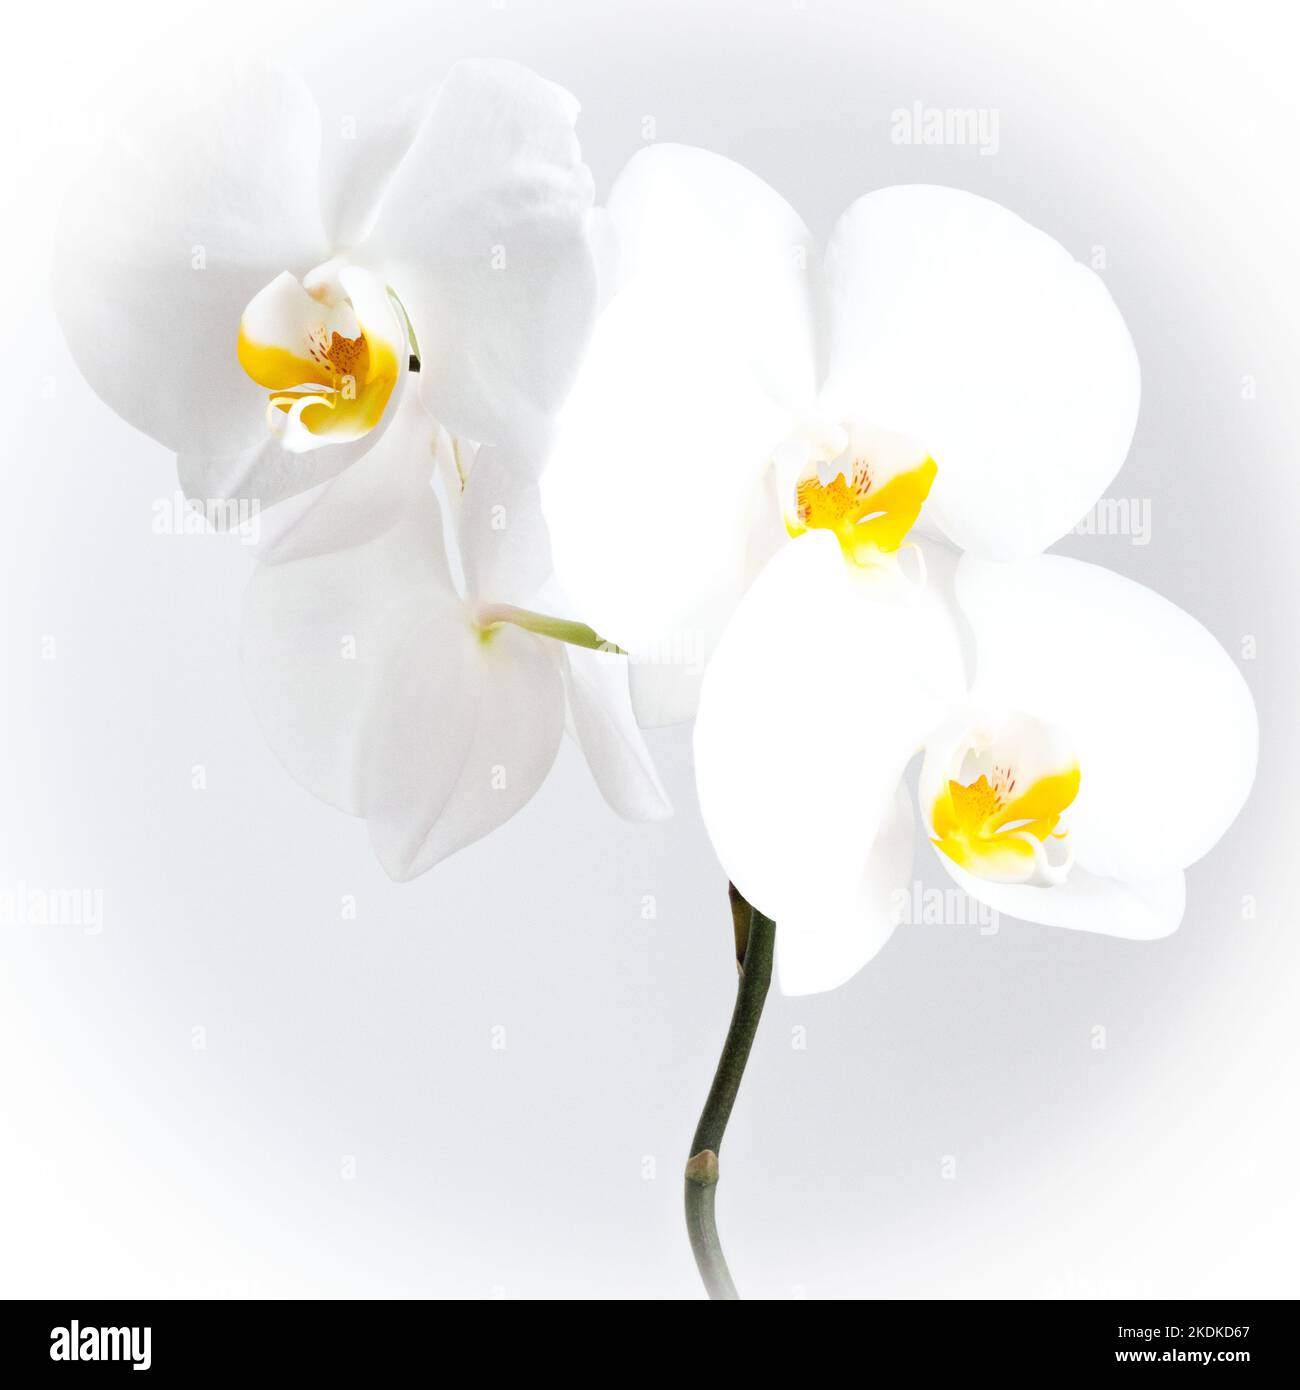 High key image of three orchid flowers with white petals, and dark stem. Stock Photo